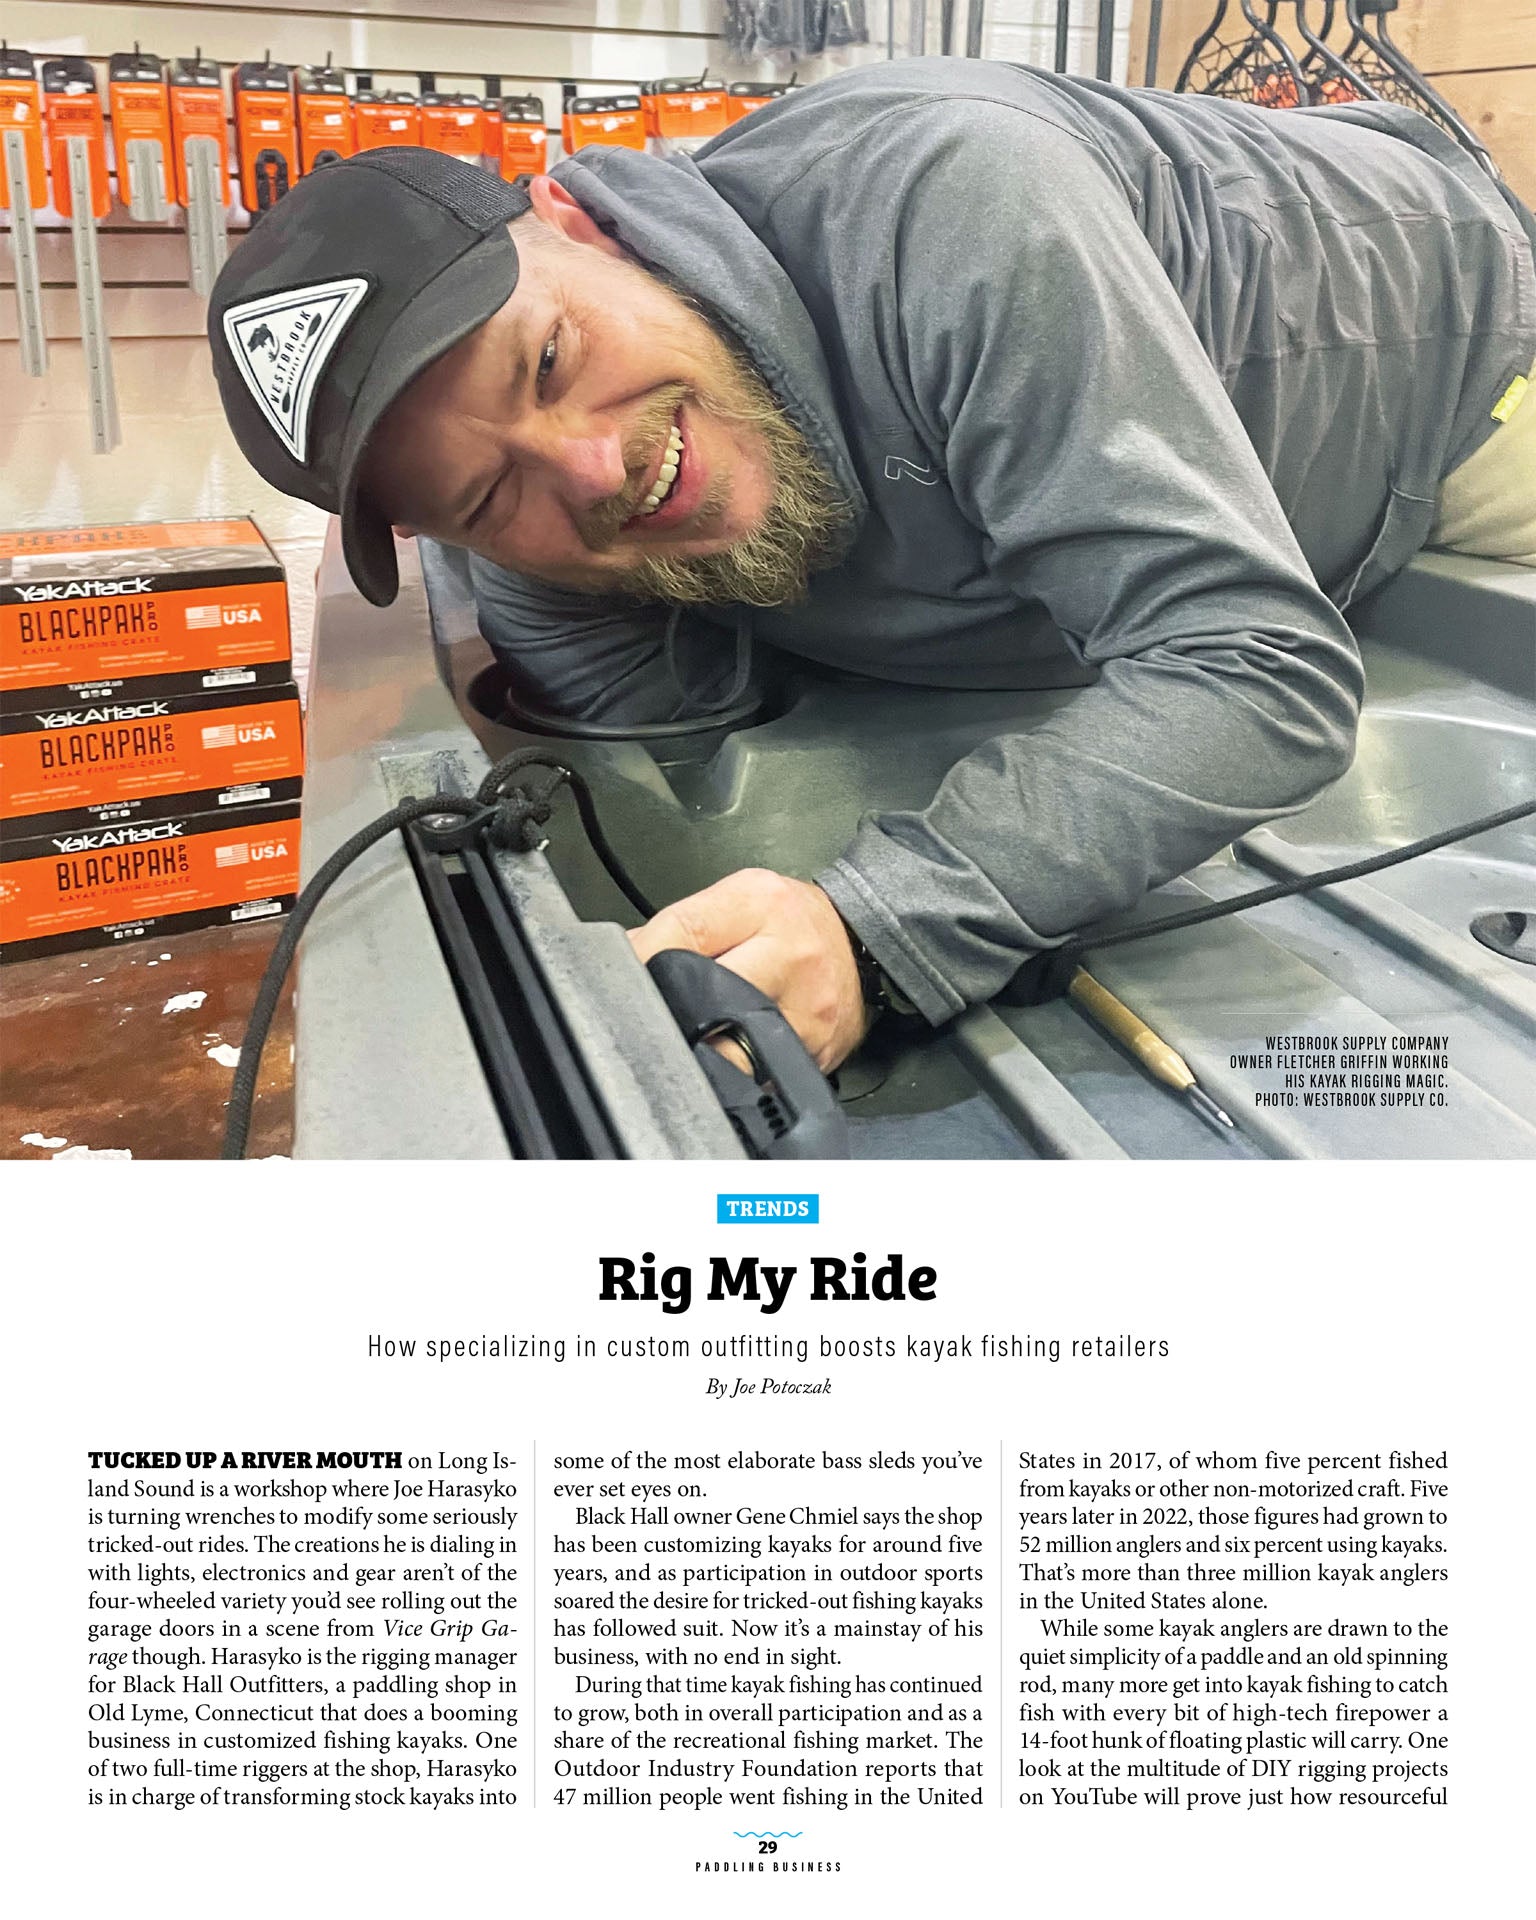 BHO MAKES THE NEWS: Our incredible rigging services were featured in Paddling Business magazine!